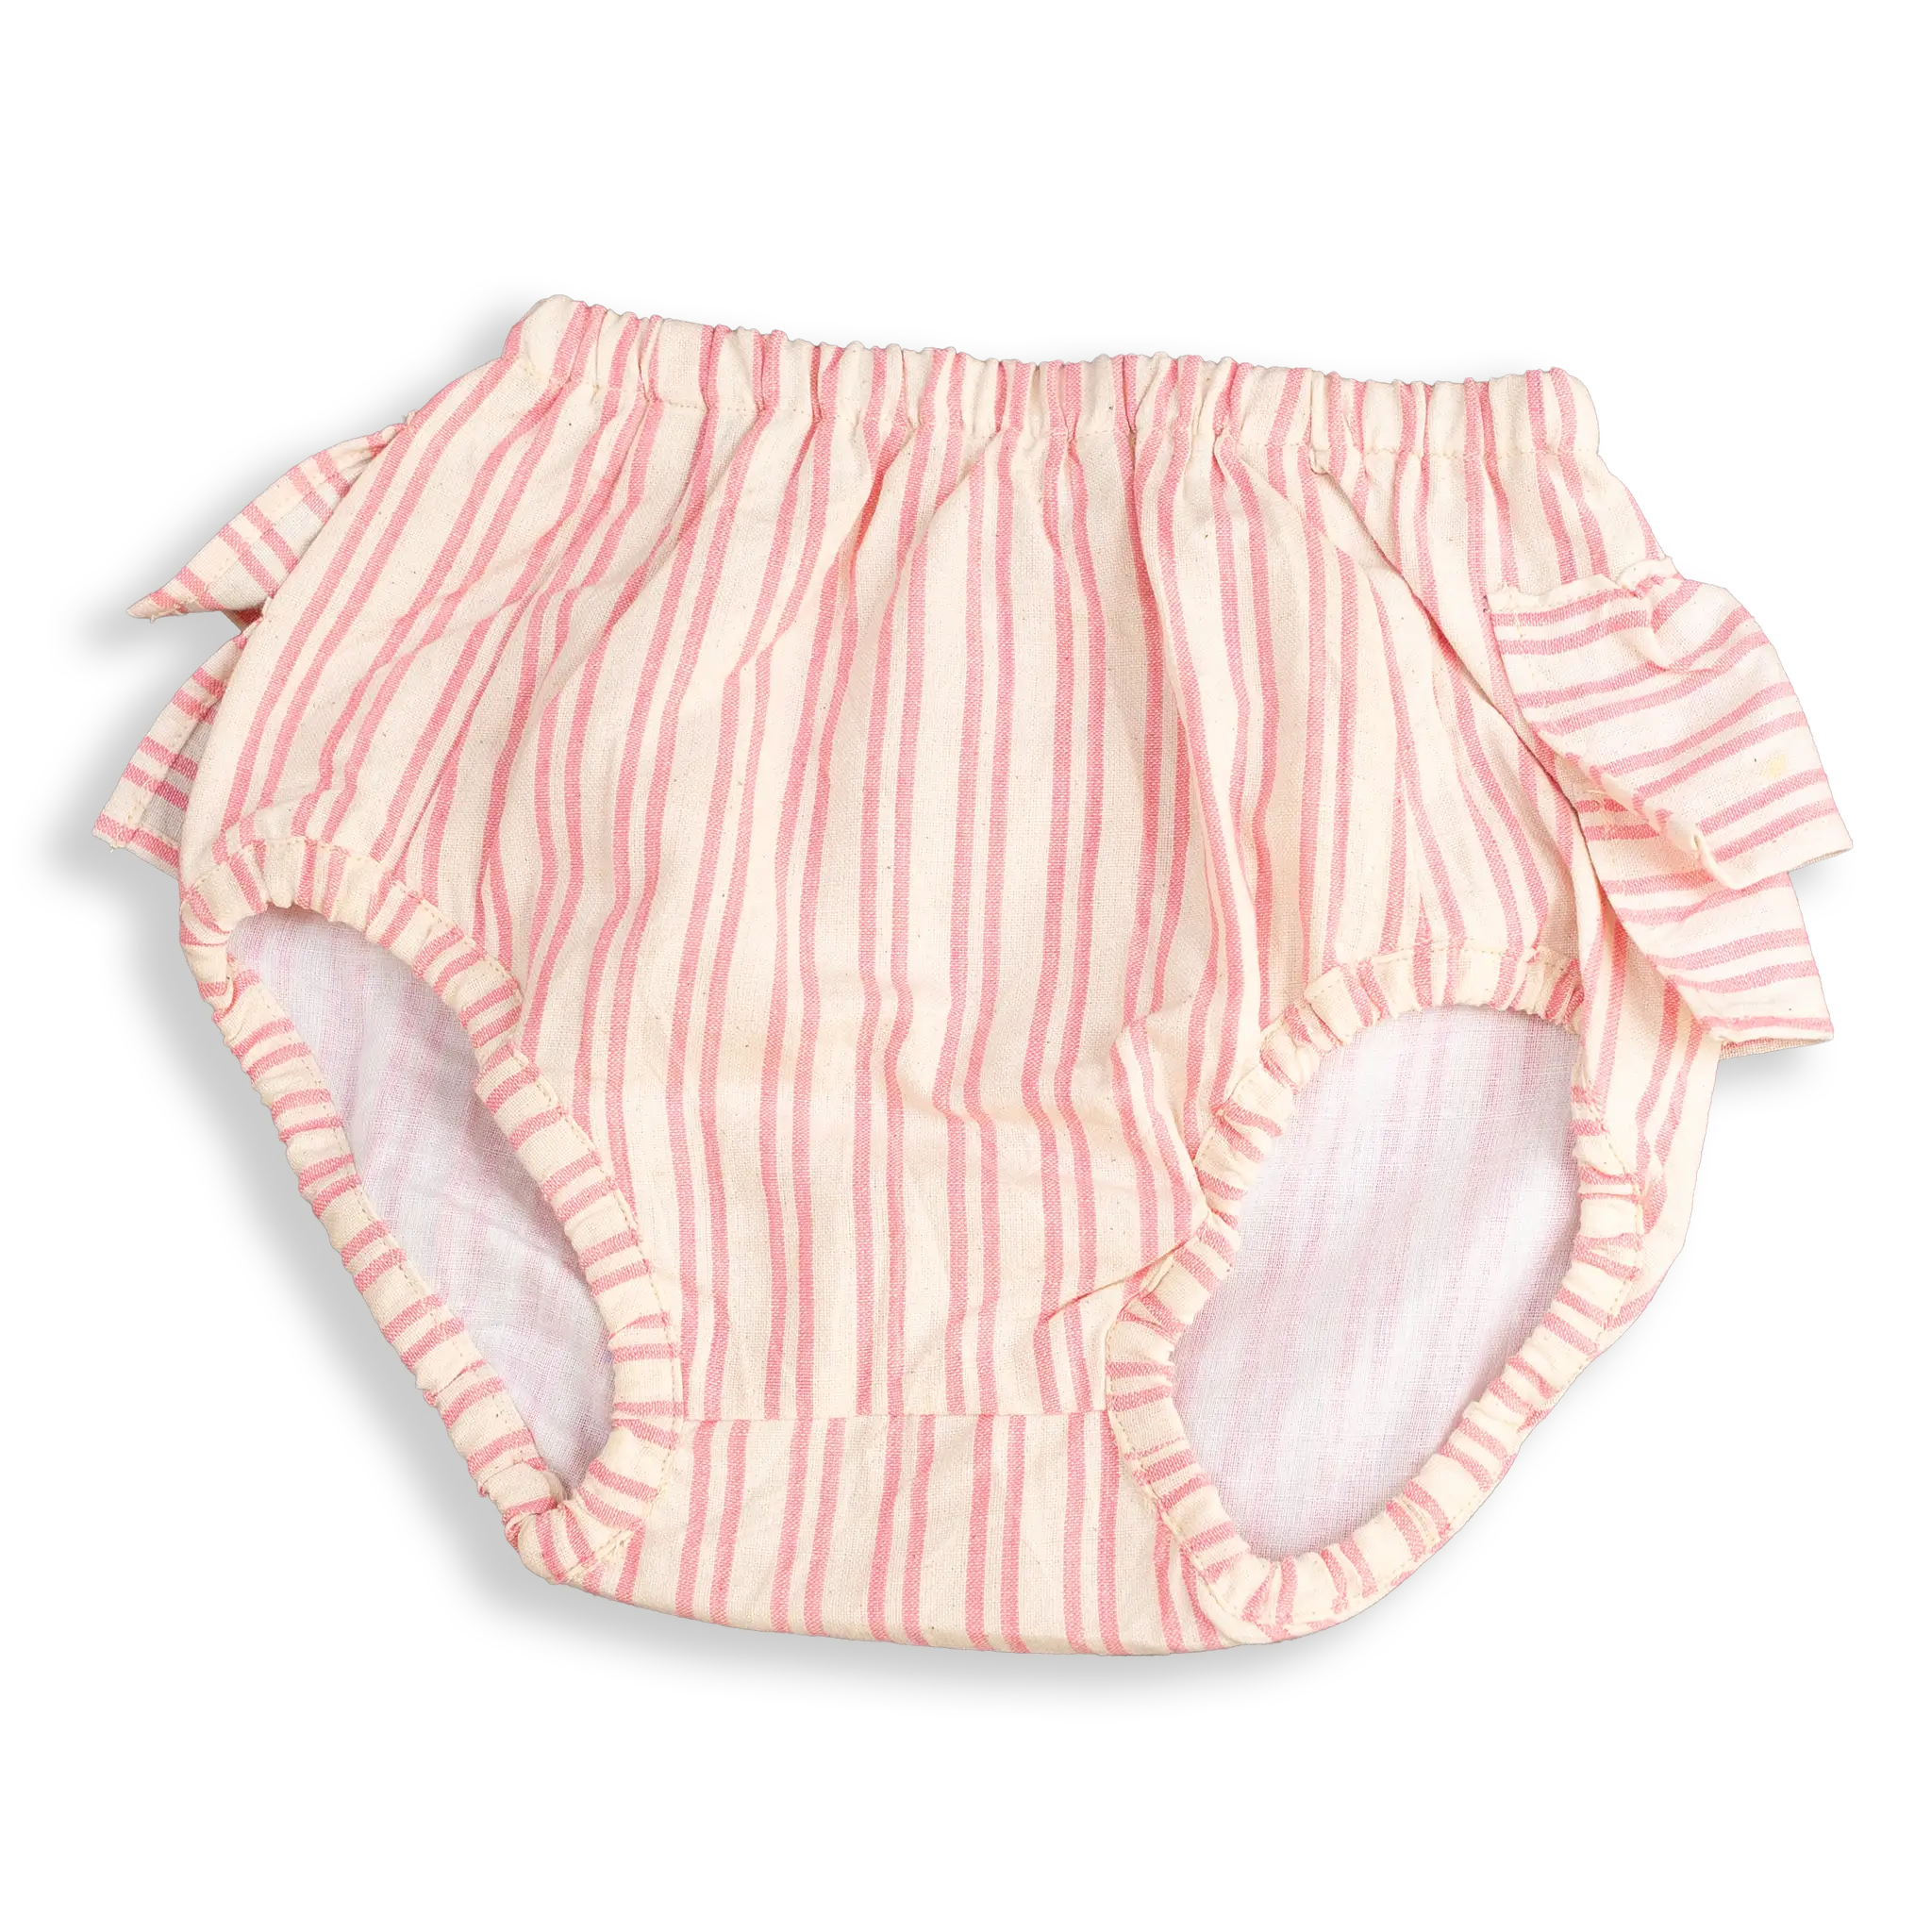 This Bloomer for baby girl is sure to give your sweetheart a frilly good time! Crafted from 100% comfy cotton and lined with mulmul, these stylish bloomers will have her looking cute as a button. 